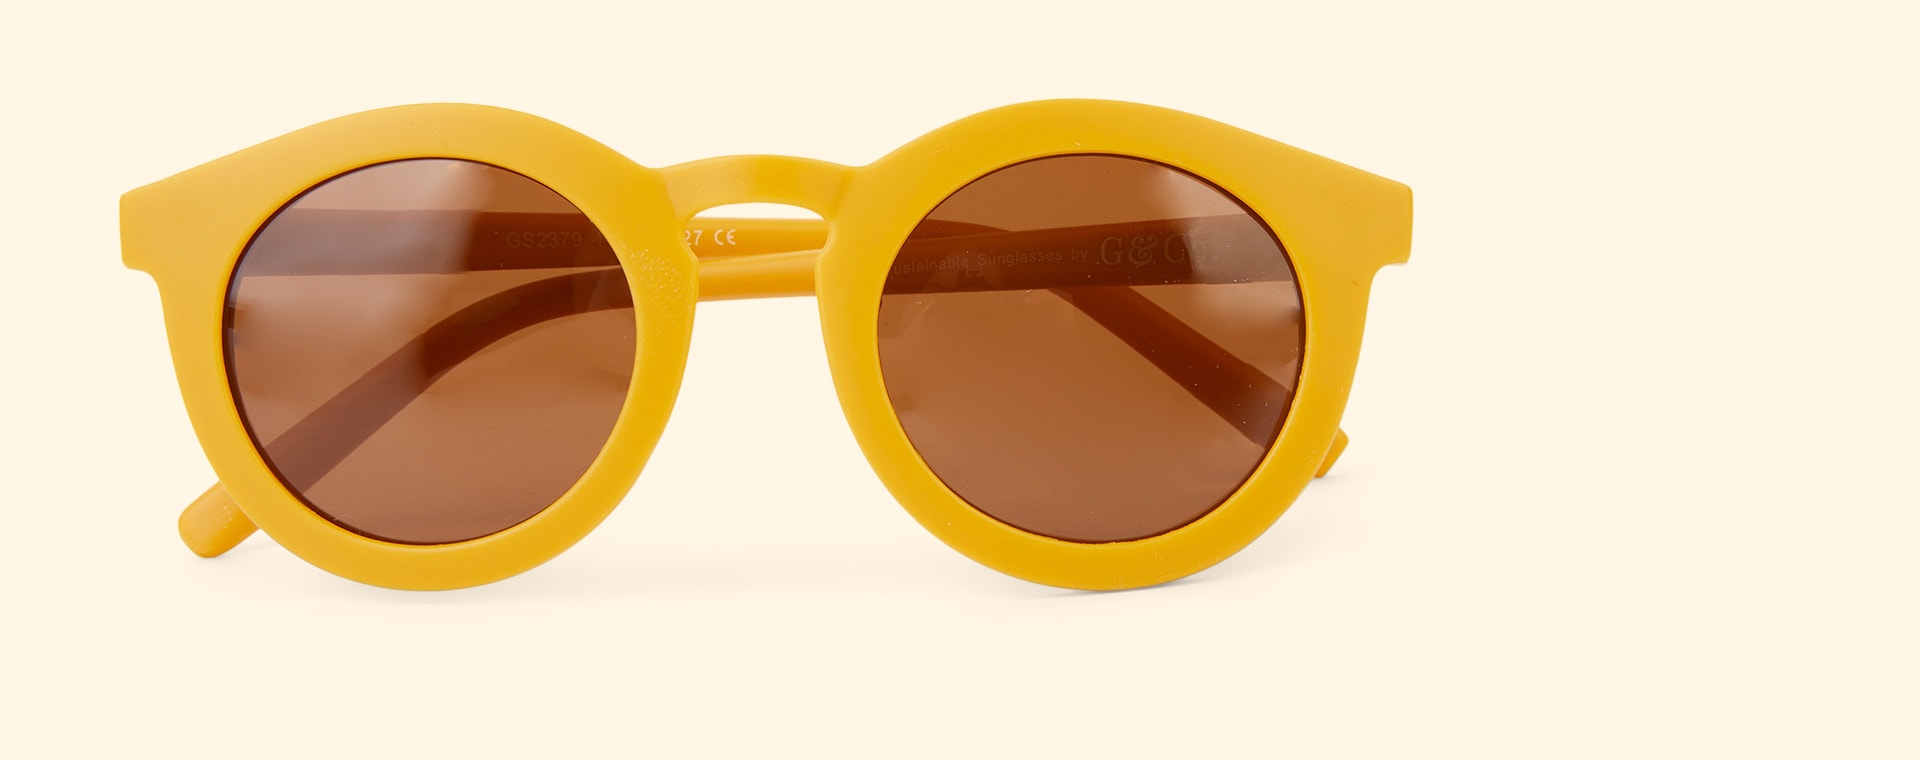 Golden Grech & Co New Sustainable Sunglasses